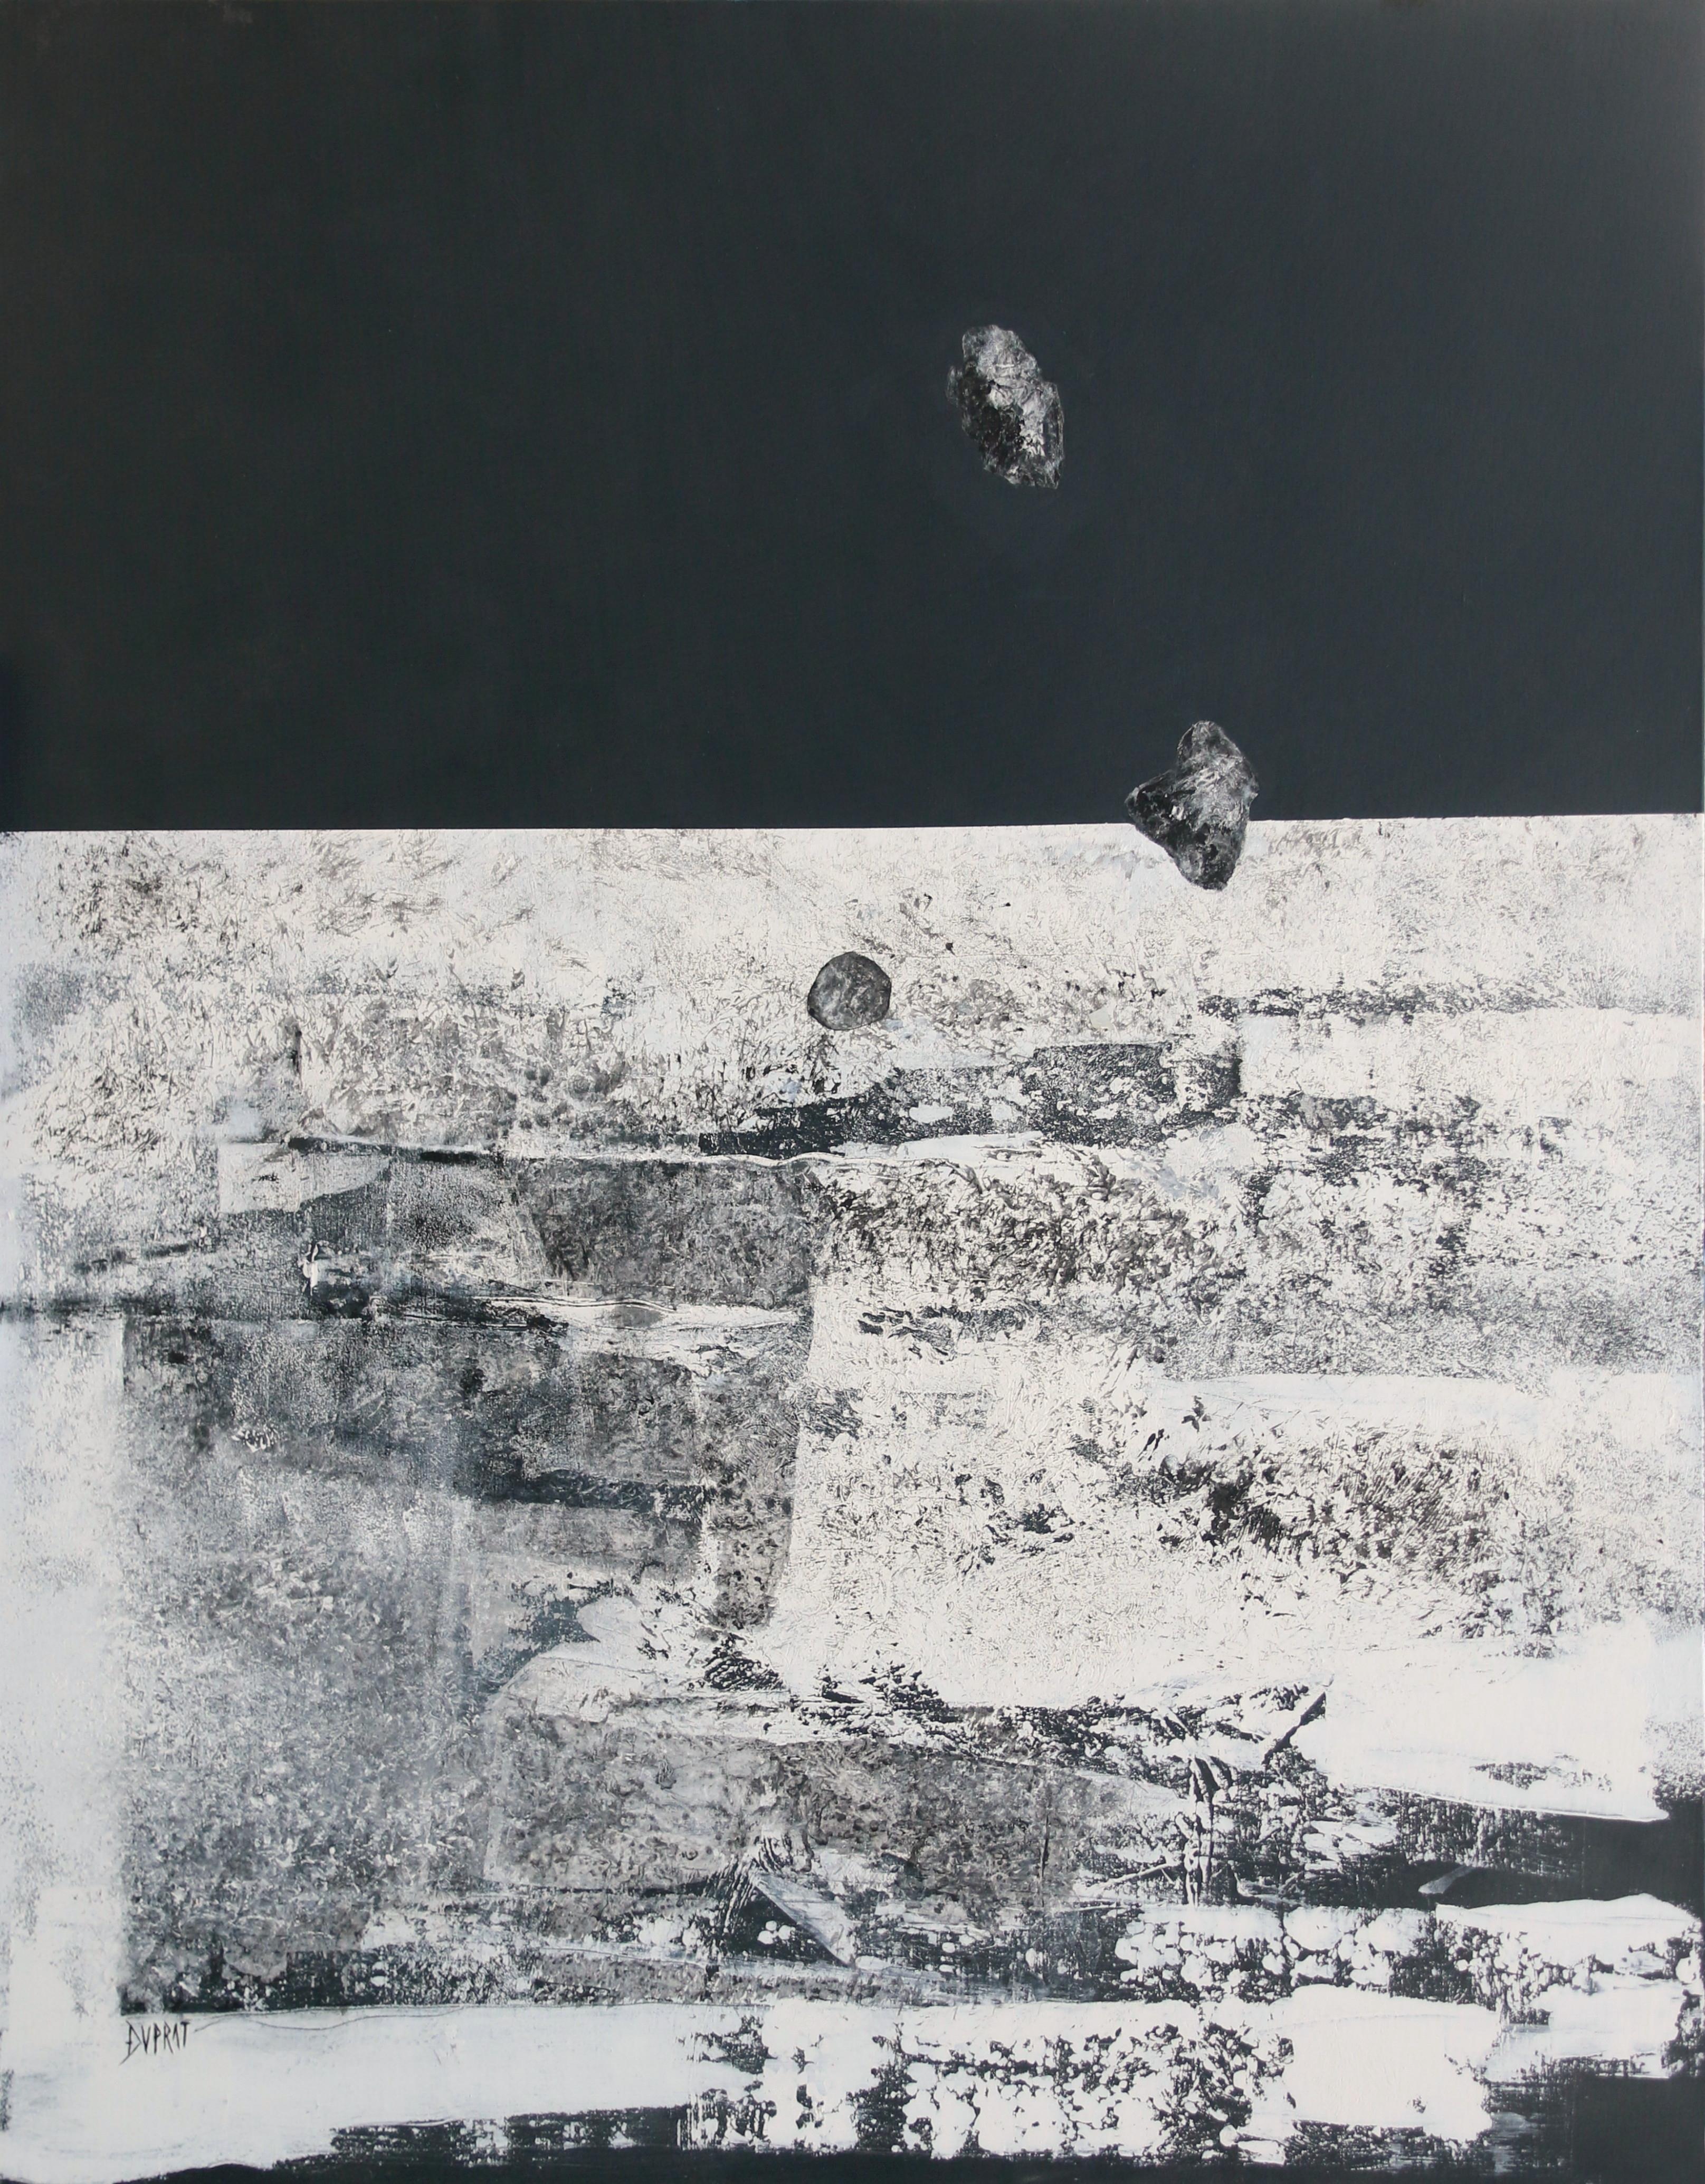 Françoise Duprat Landscape Painting - "Where are we?", Large Black and White Abstract Lunar Landscape Acrylic Painting